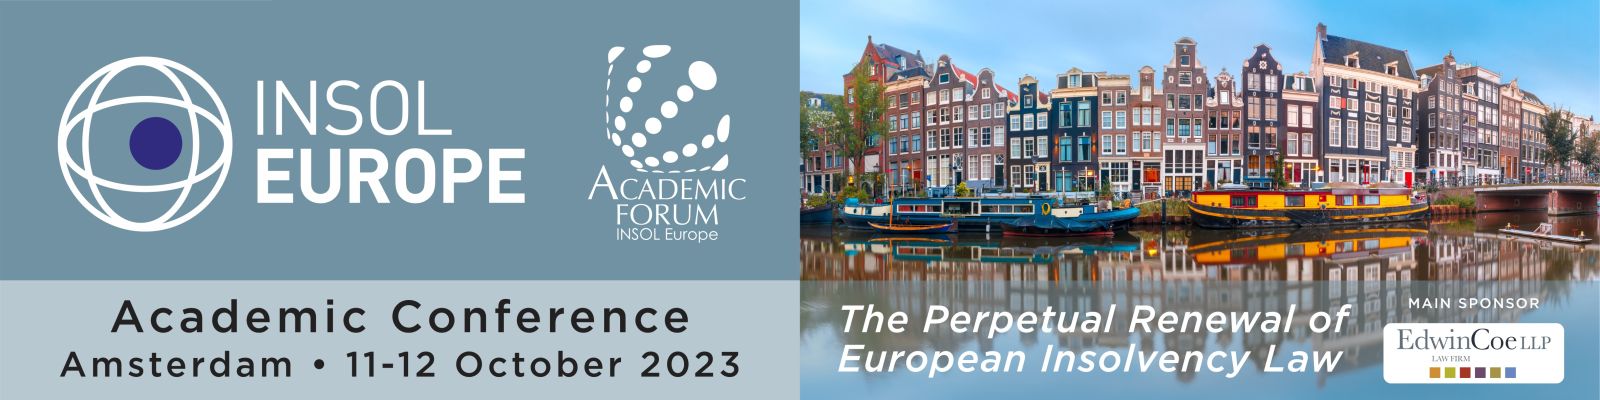 INSOL Europe Academic Conference 2023: Amsterdam, The Netherlands